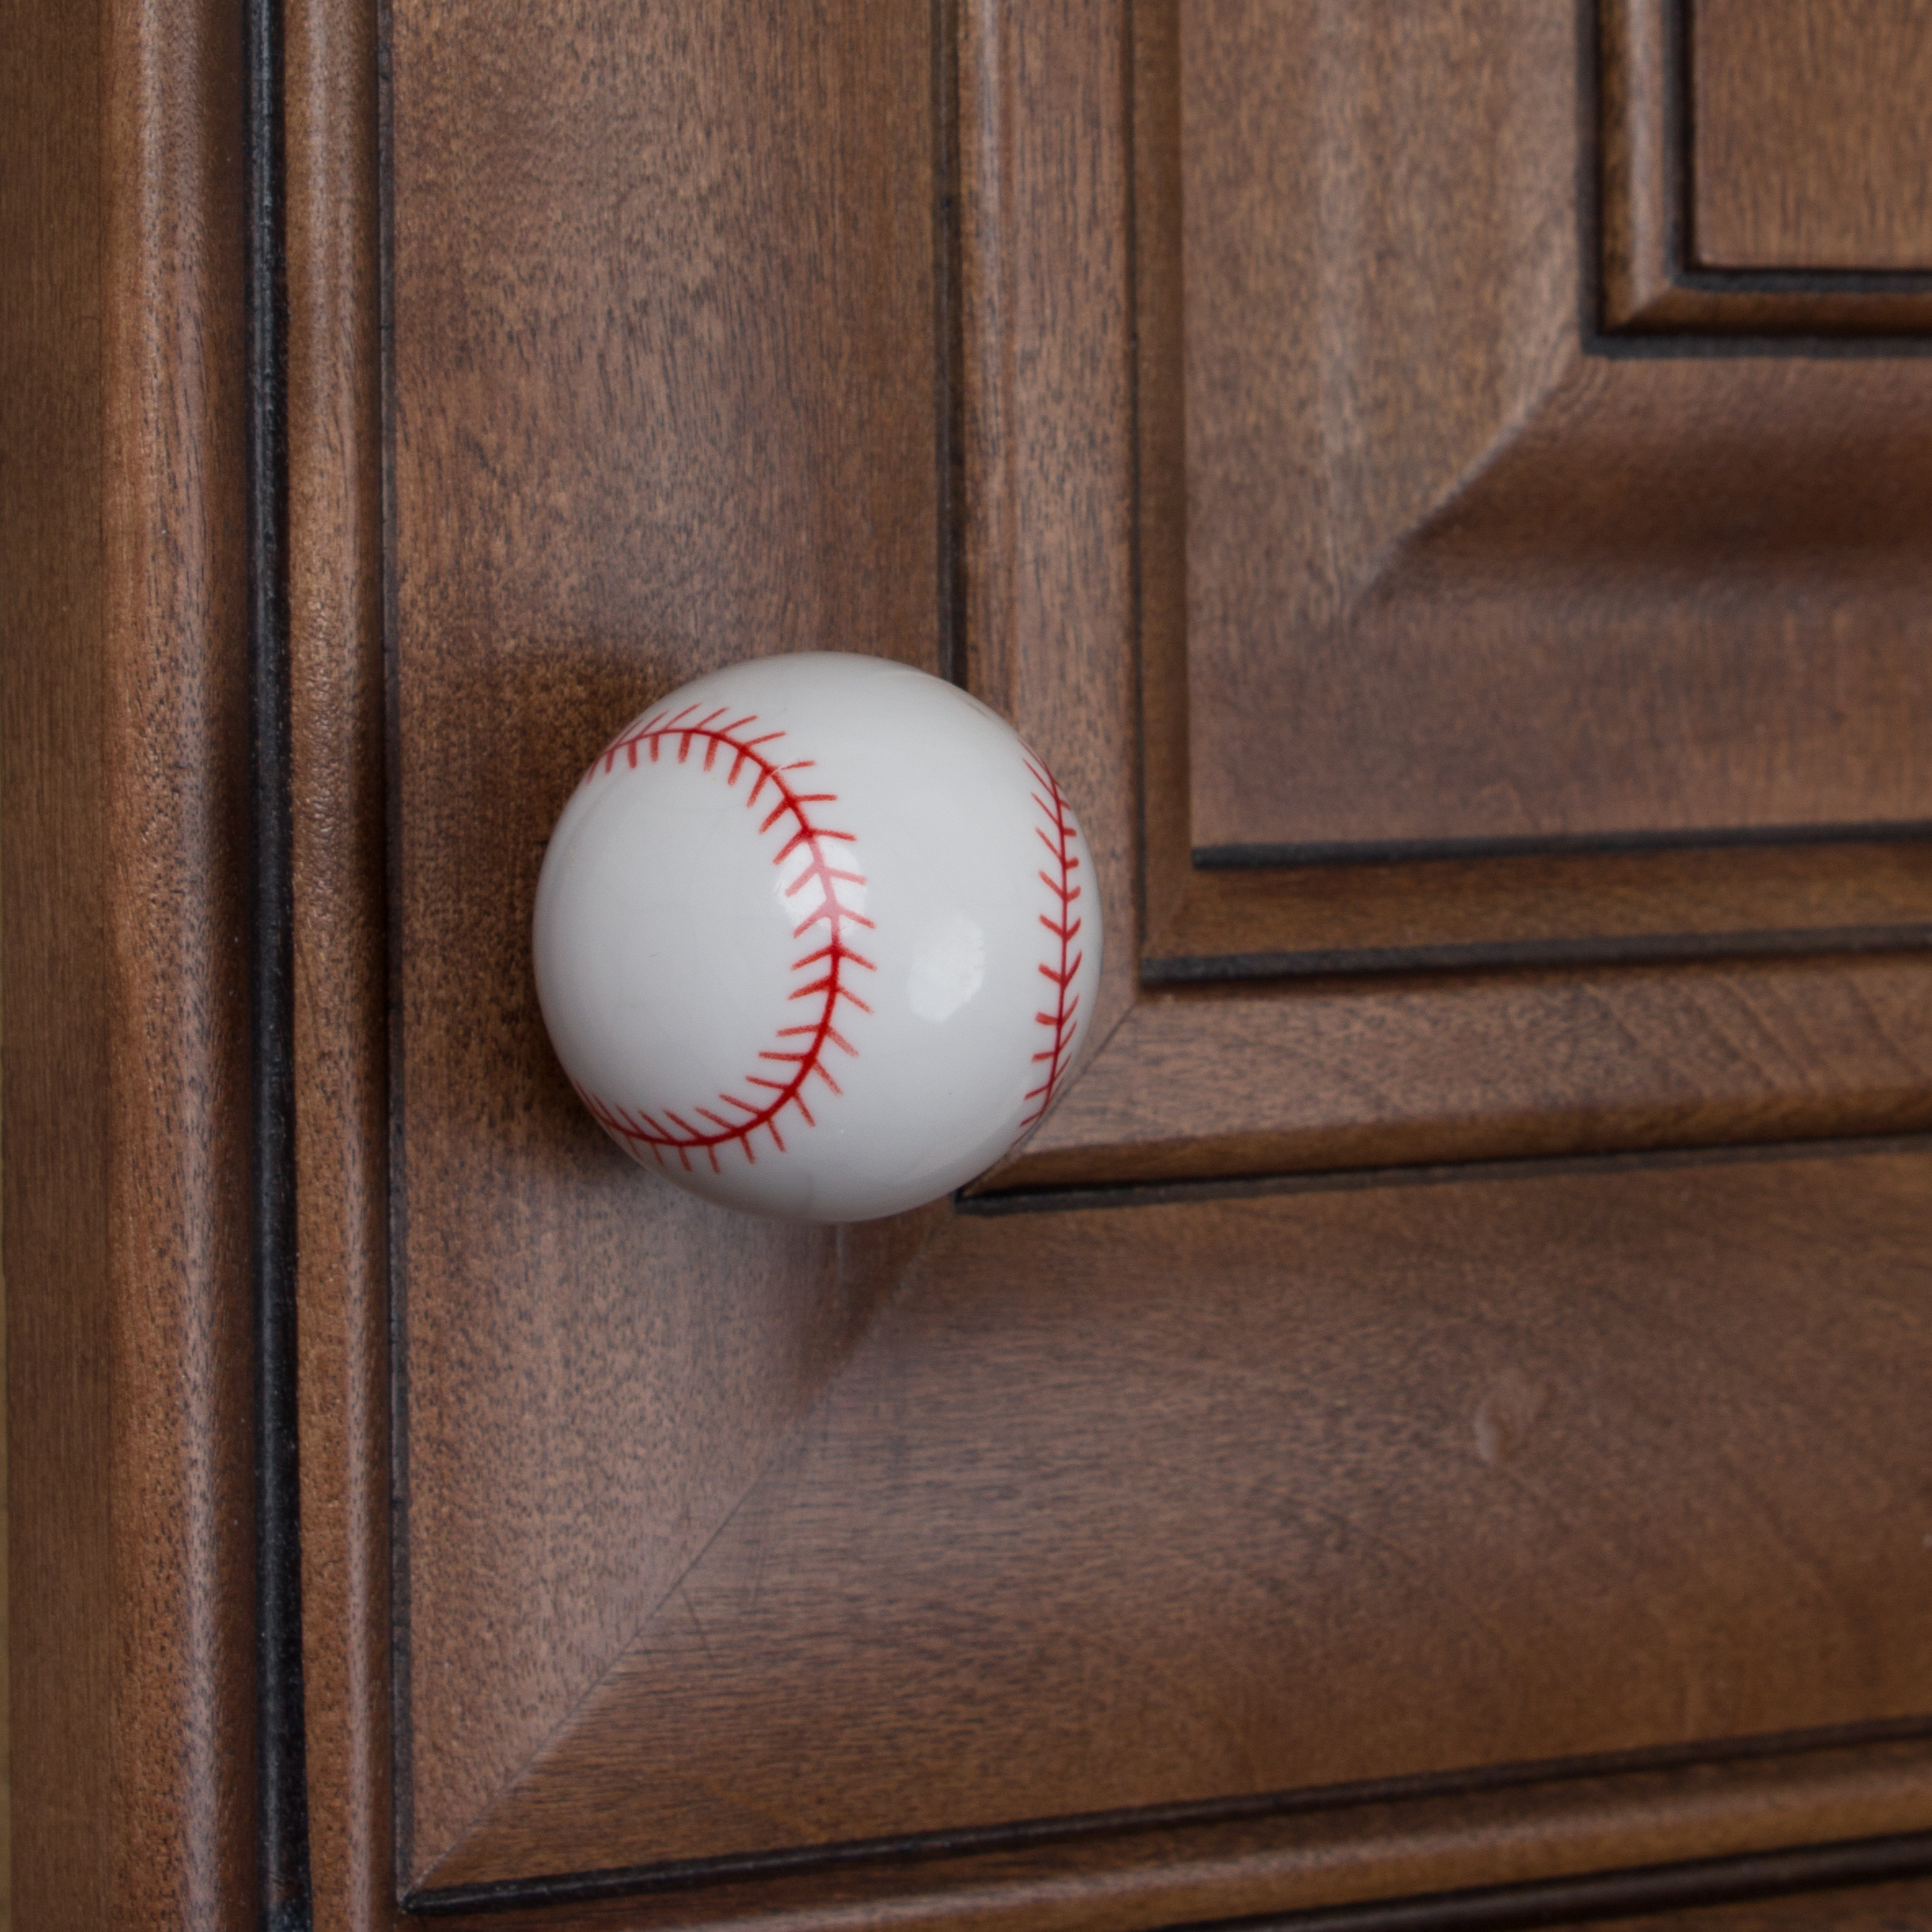 GlideRite 1-1/4 in. Baseball Sports Dresser Drawer Cabinet Knobs, Pack of 5 - image 4 of 4